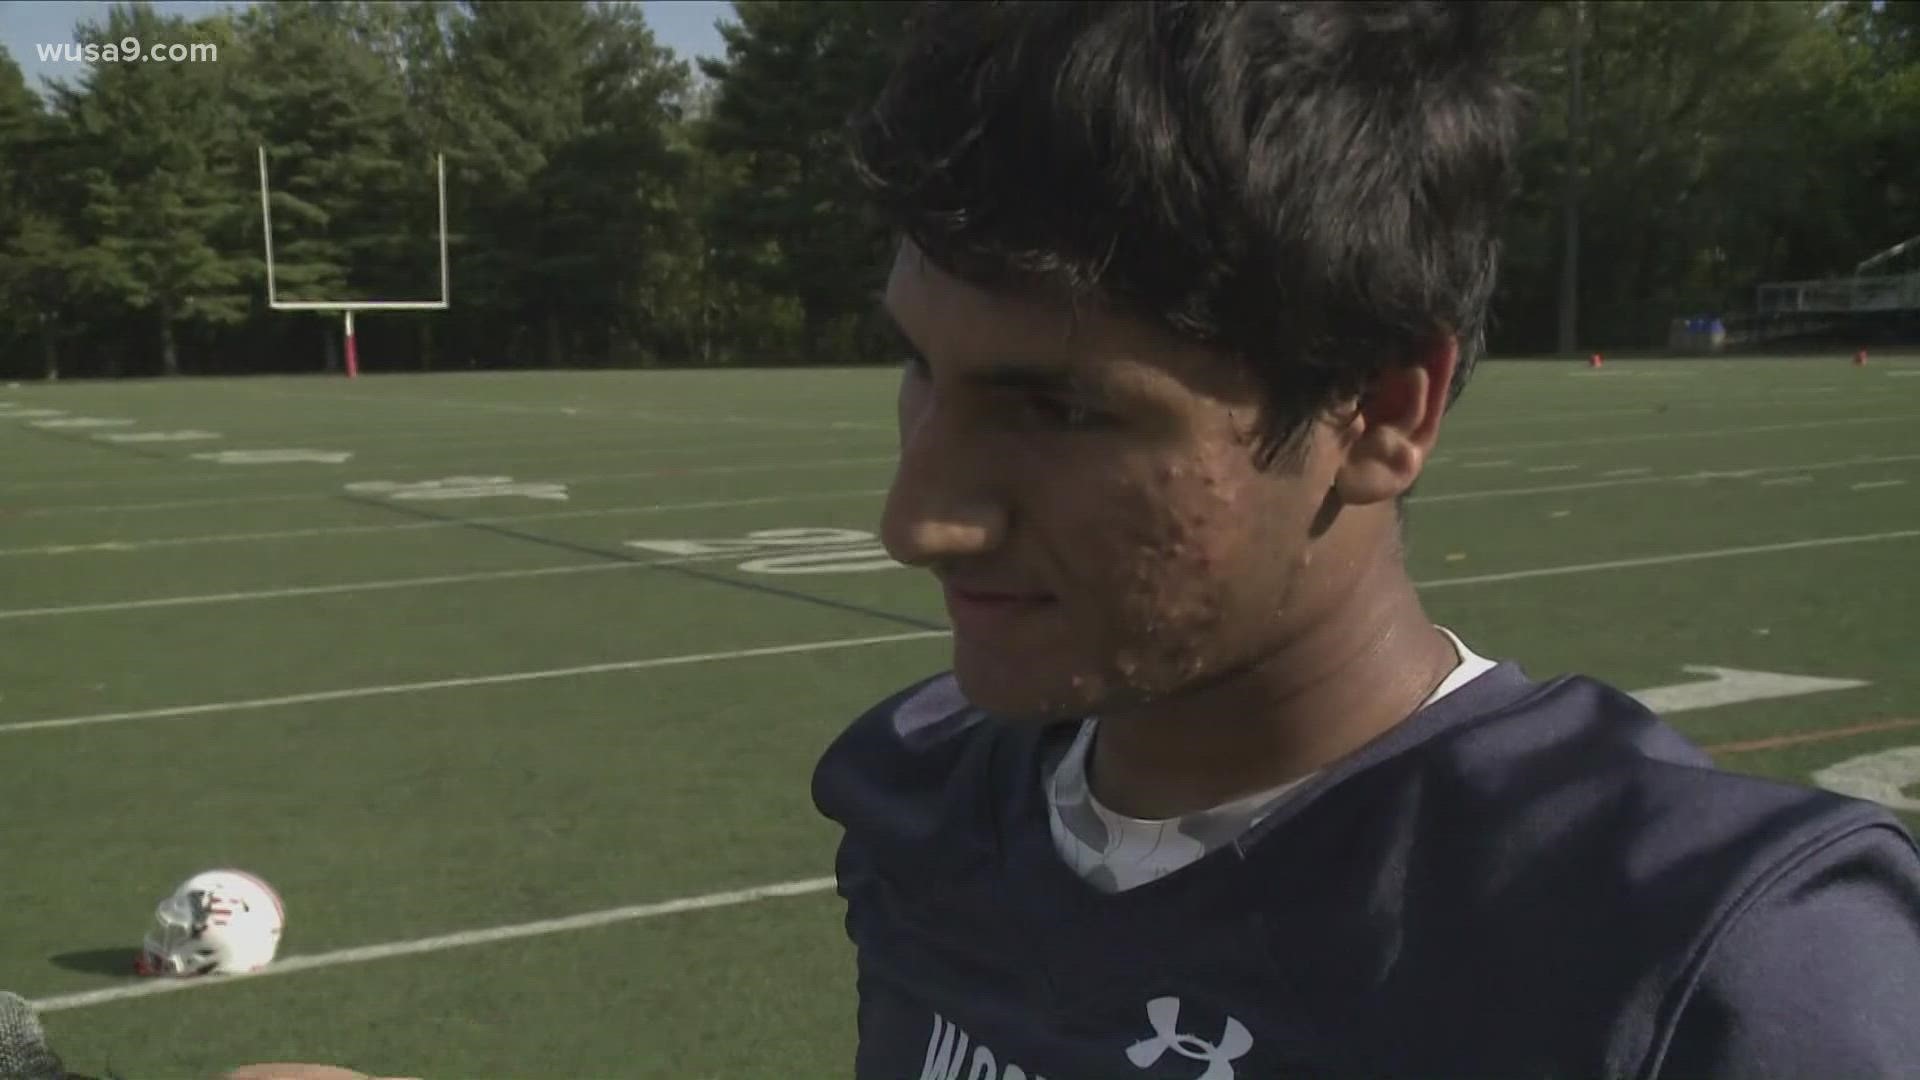 WUSA9 chats with Wootton High School's quarterback ahead of the Game of the Week in Montgomery County.